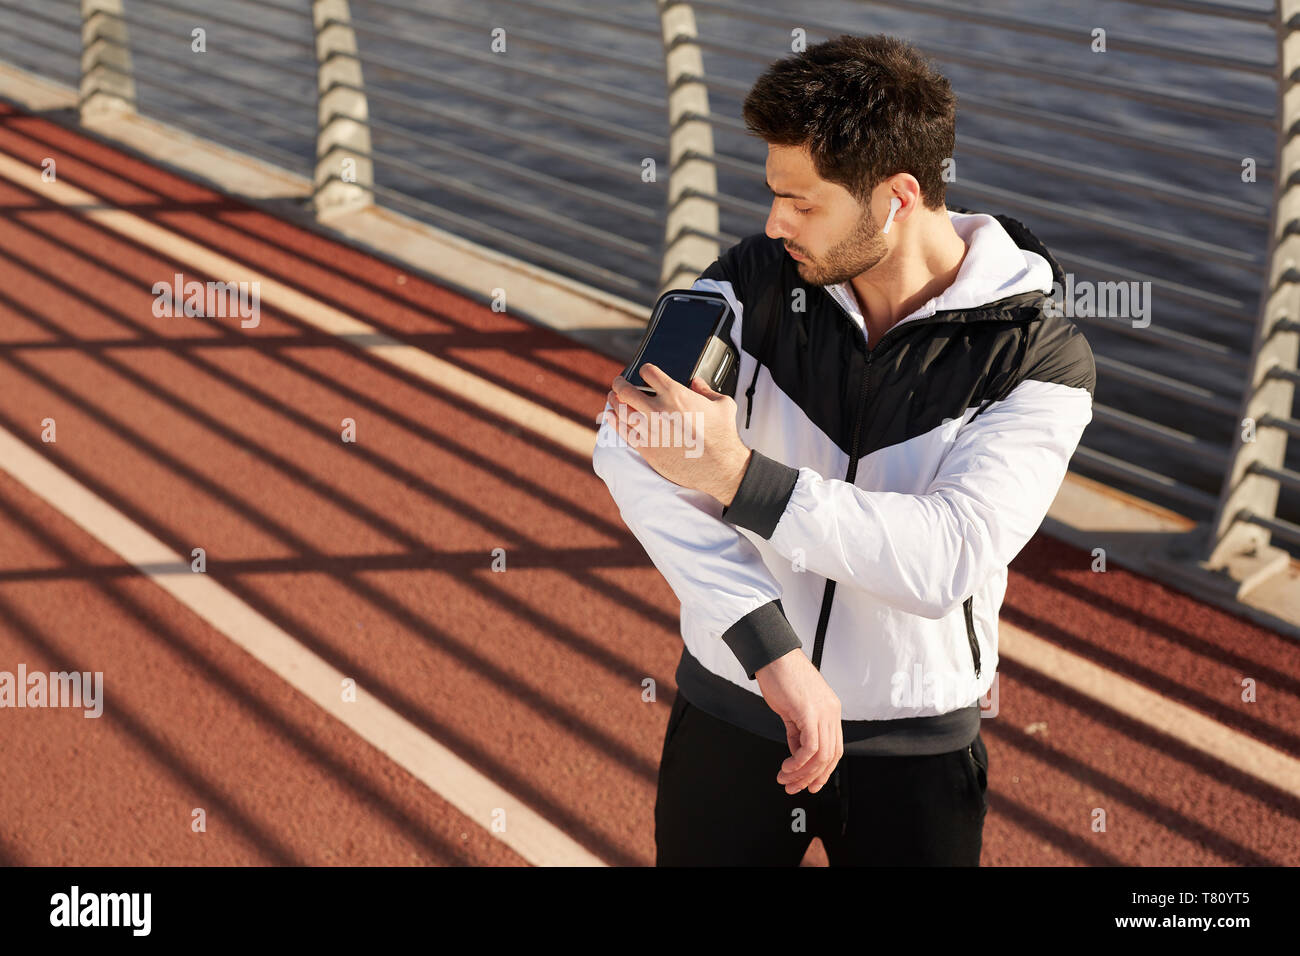 Sportsman with smartphone Stock Photo